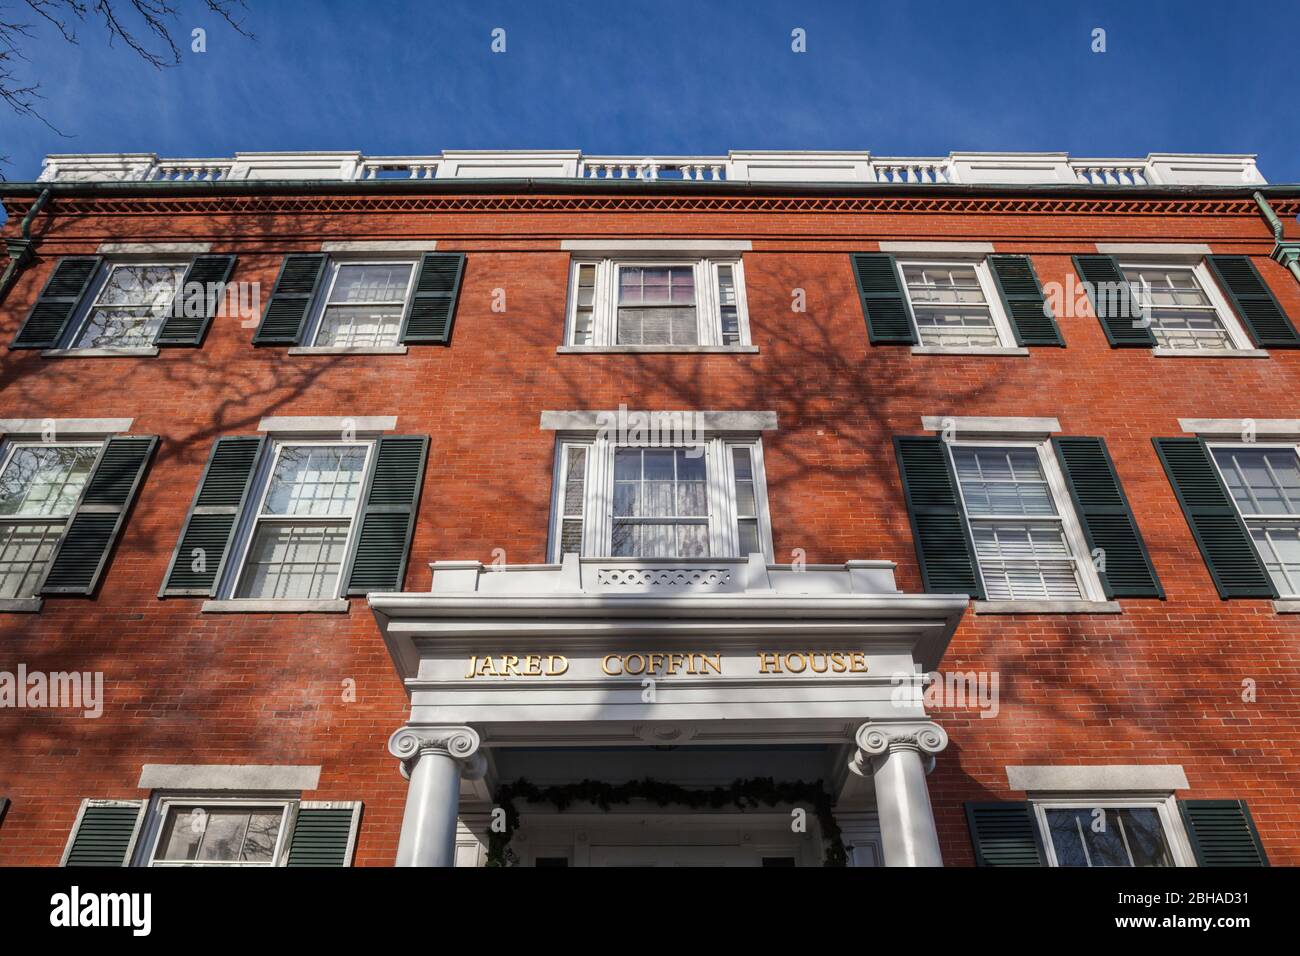 USA, New England, Massachusetts, Nantucket Island, Nantucket Town, Jared Coffin House, former whaling mansion and now a hotel Stock Photo